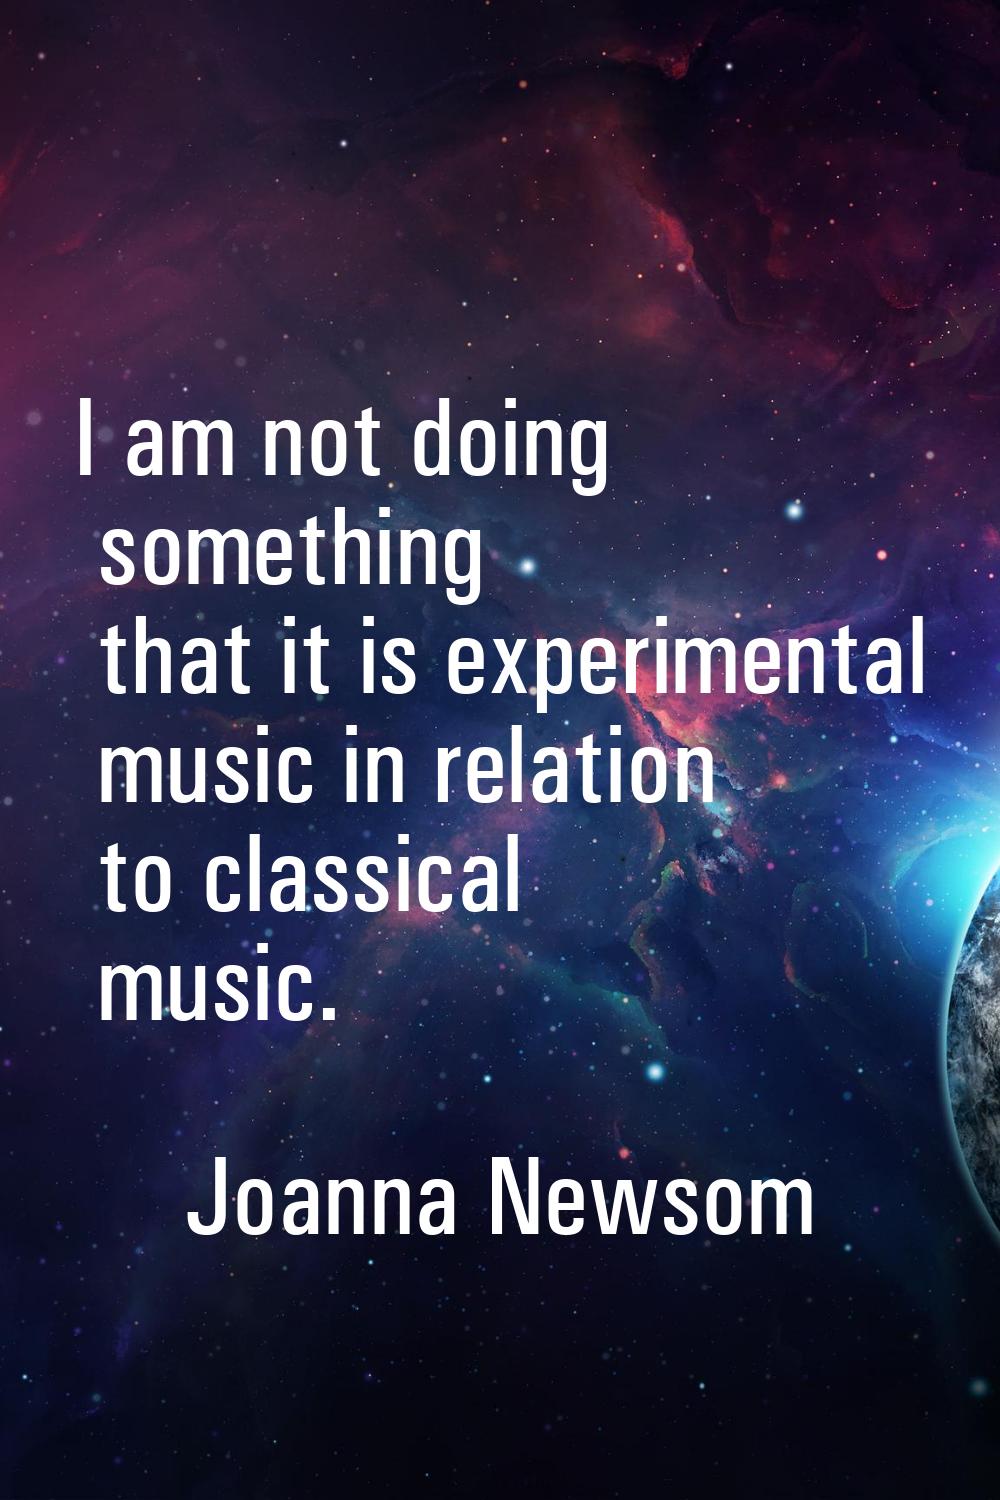 I am not doing something that it is experimental music in relation to classical music.